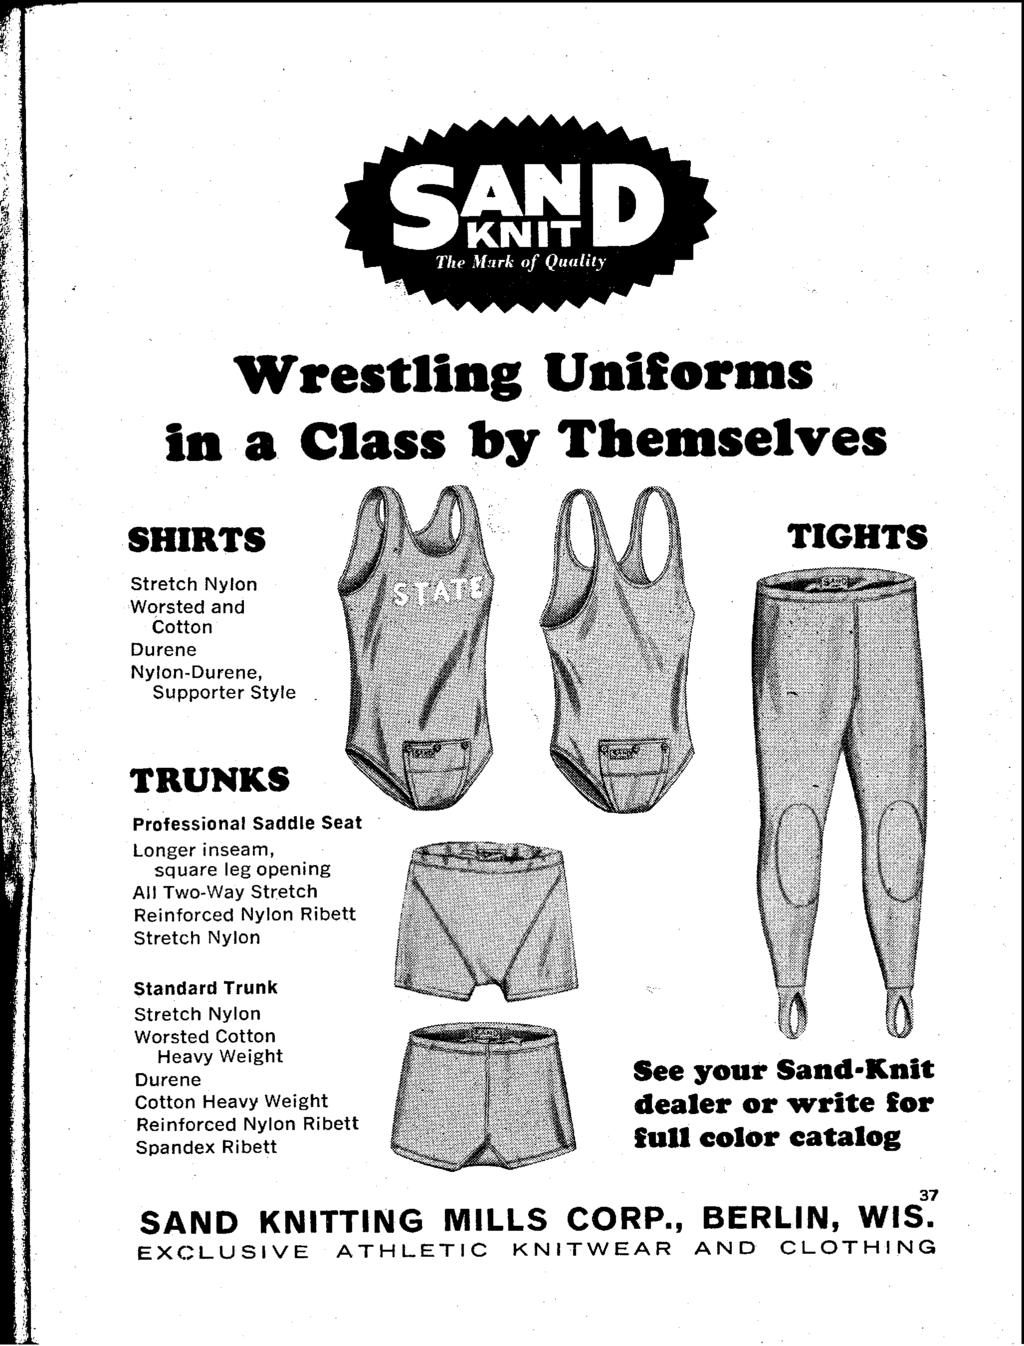 Wrestling UniEorms in a Class by Themselves SHIRTS Stretch Nylon Worsted and Cotton Durene Nylon-Durene, Supporter Style TIGHTS TRUNKS Professional Saddle Seat Longer inseam, square leg opening All